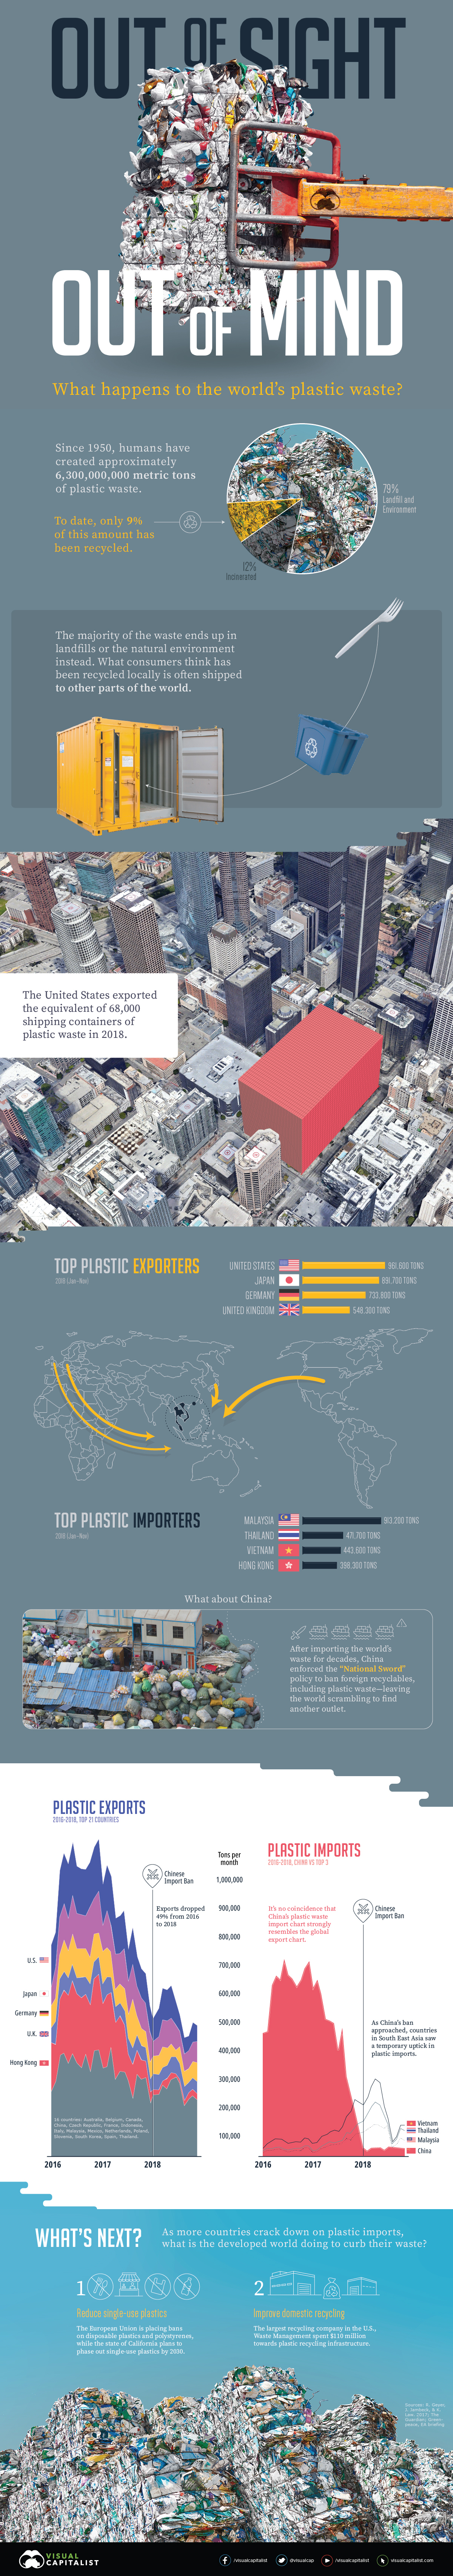 Plastic Waste Imports and Exports